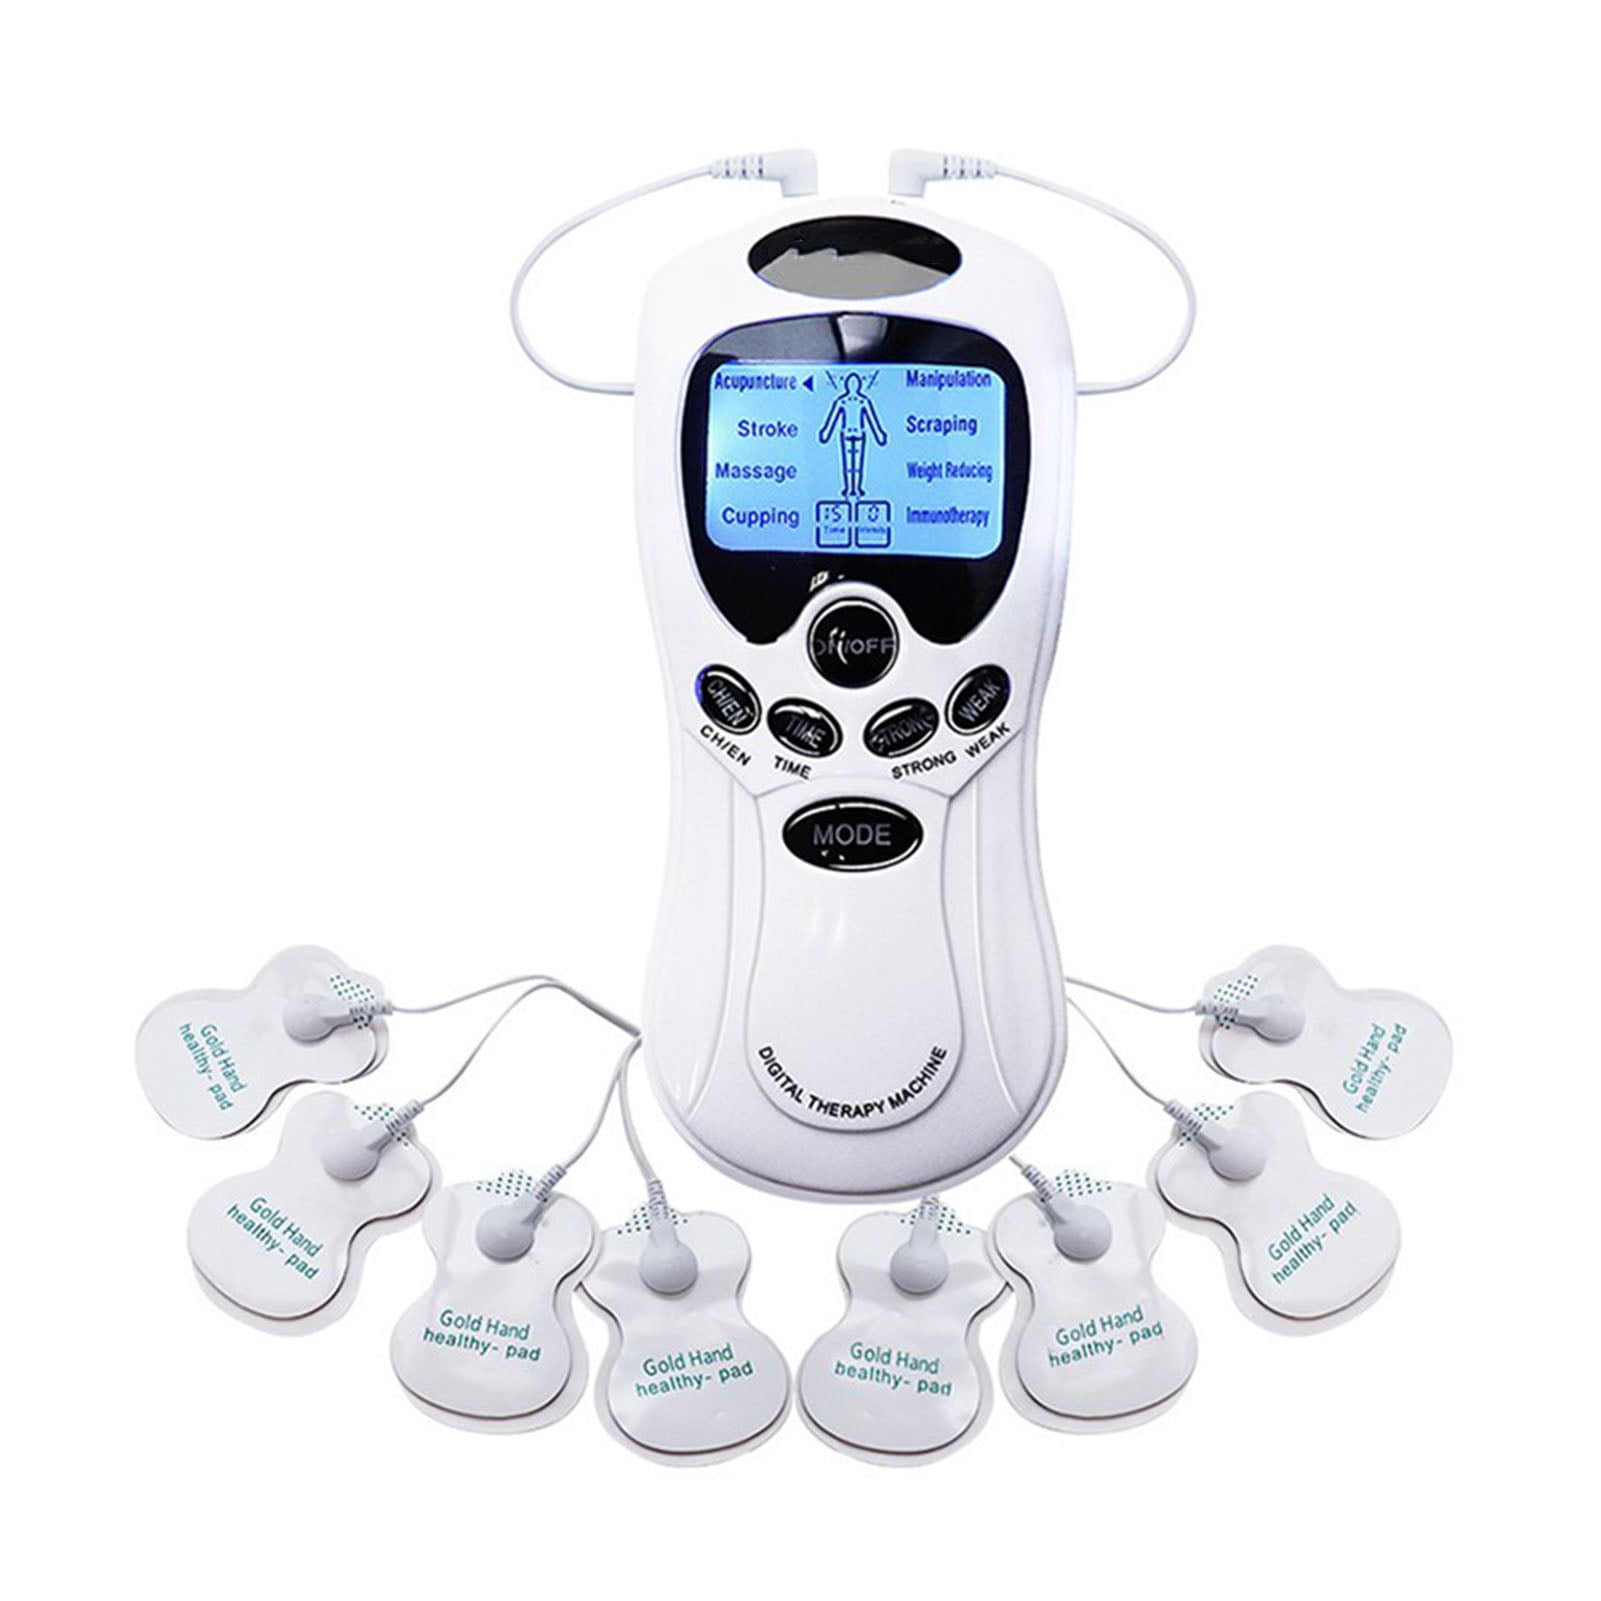 Usb Electric Low Frequency Current Pulse Massager Pads For